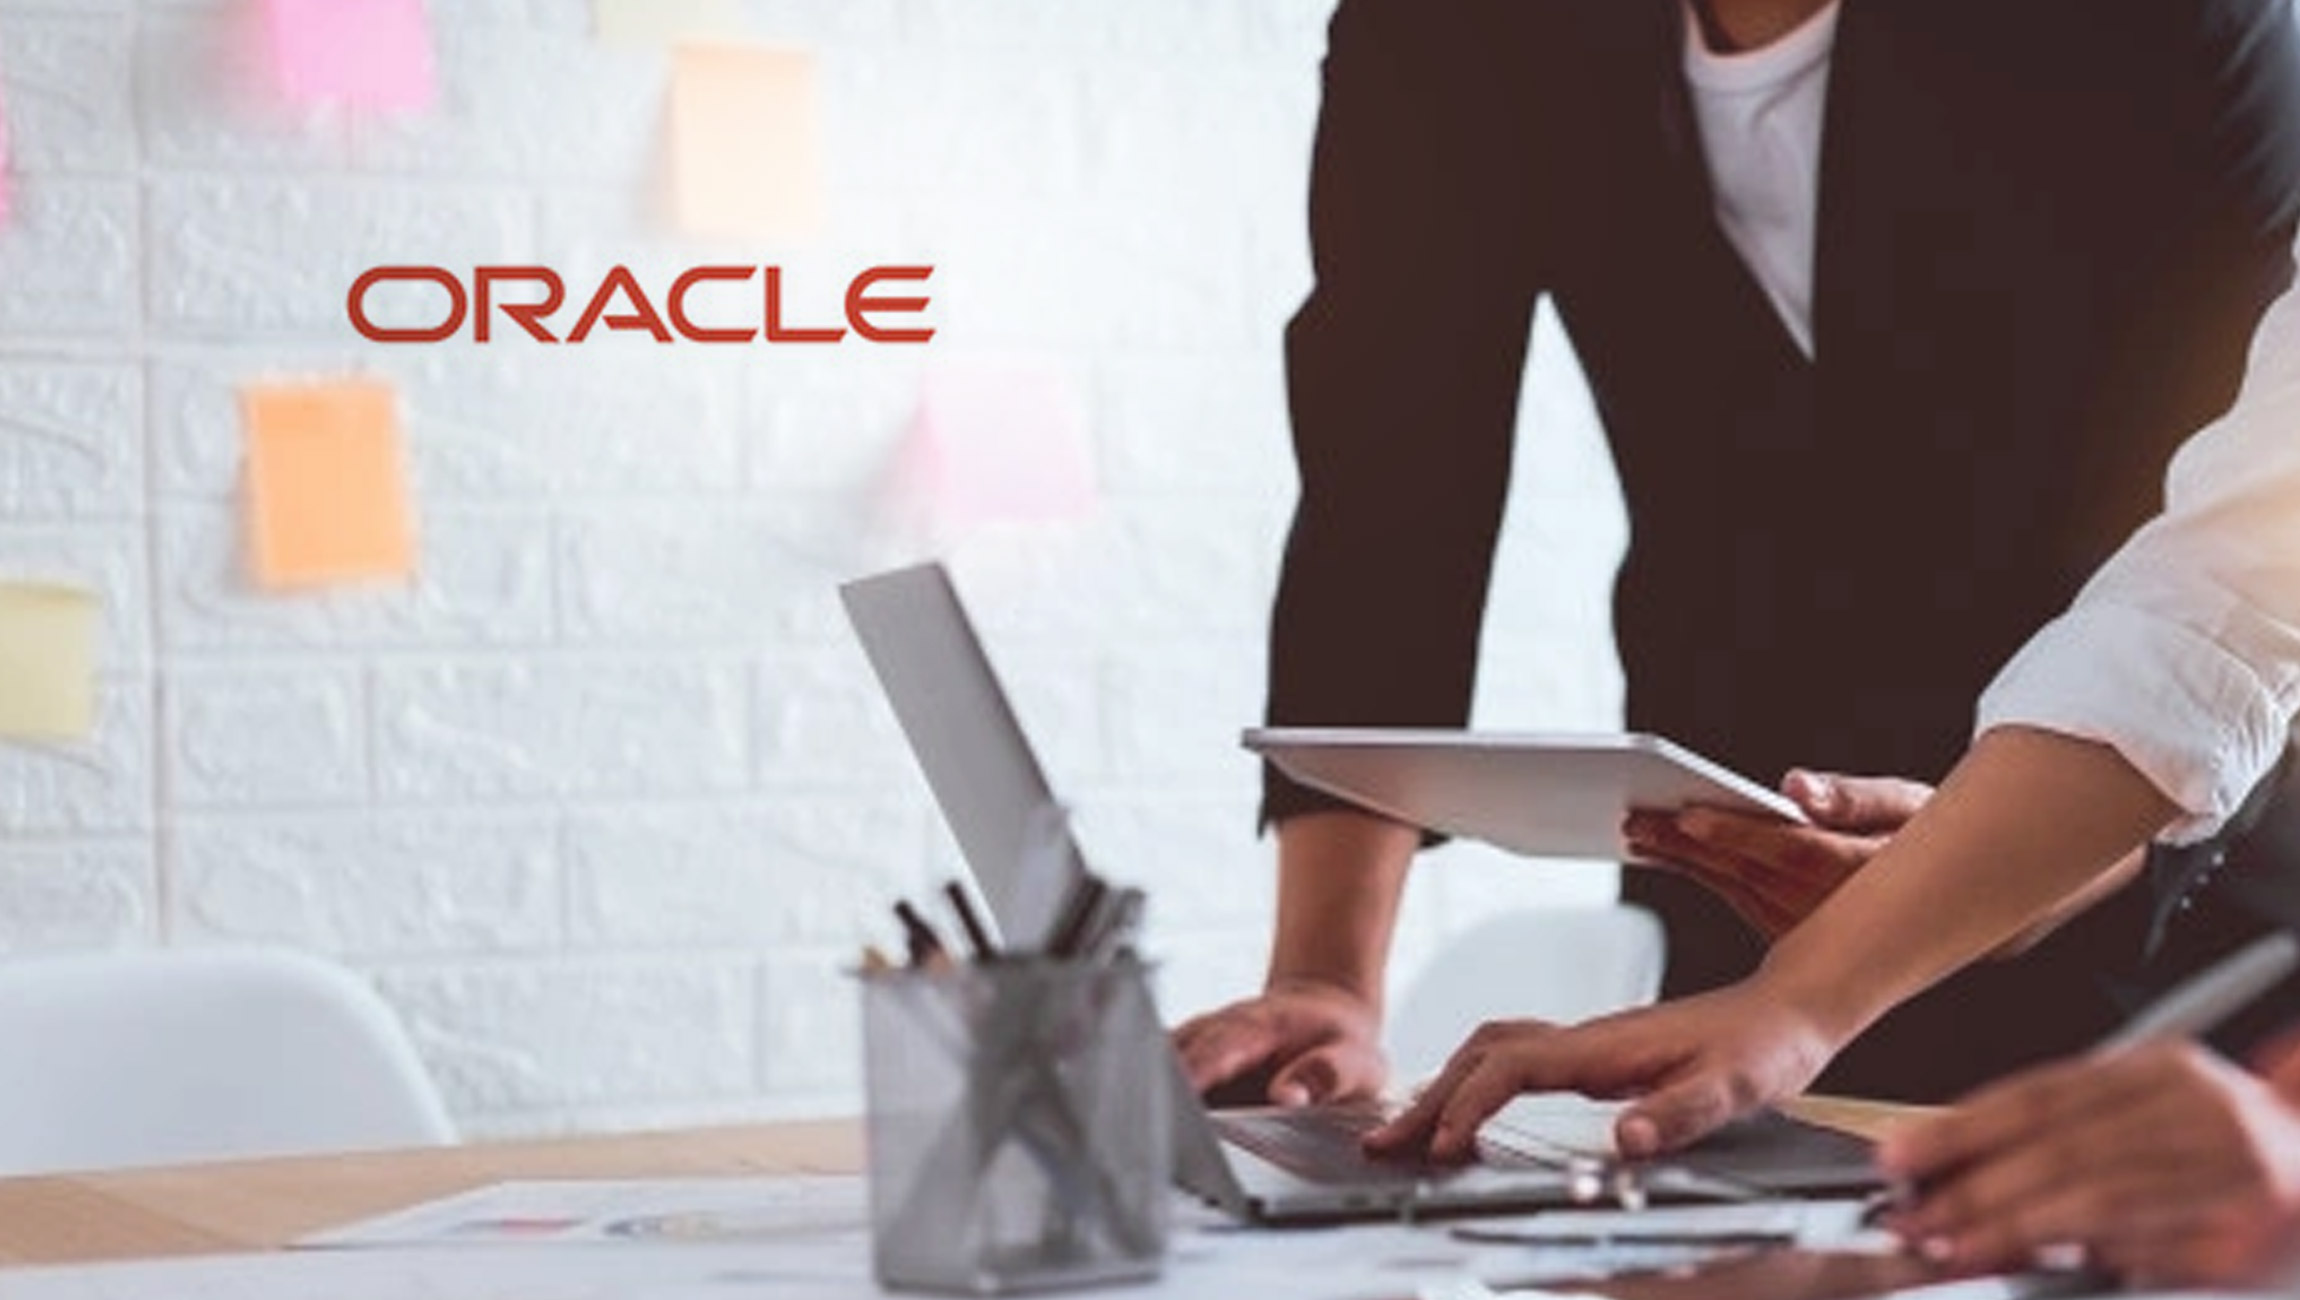 New Oracle Cloud CX for Utilities Solution Helps Agents Resolve Issues Faster and Better Support Customers